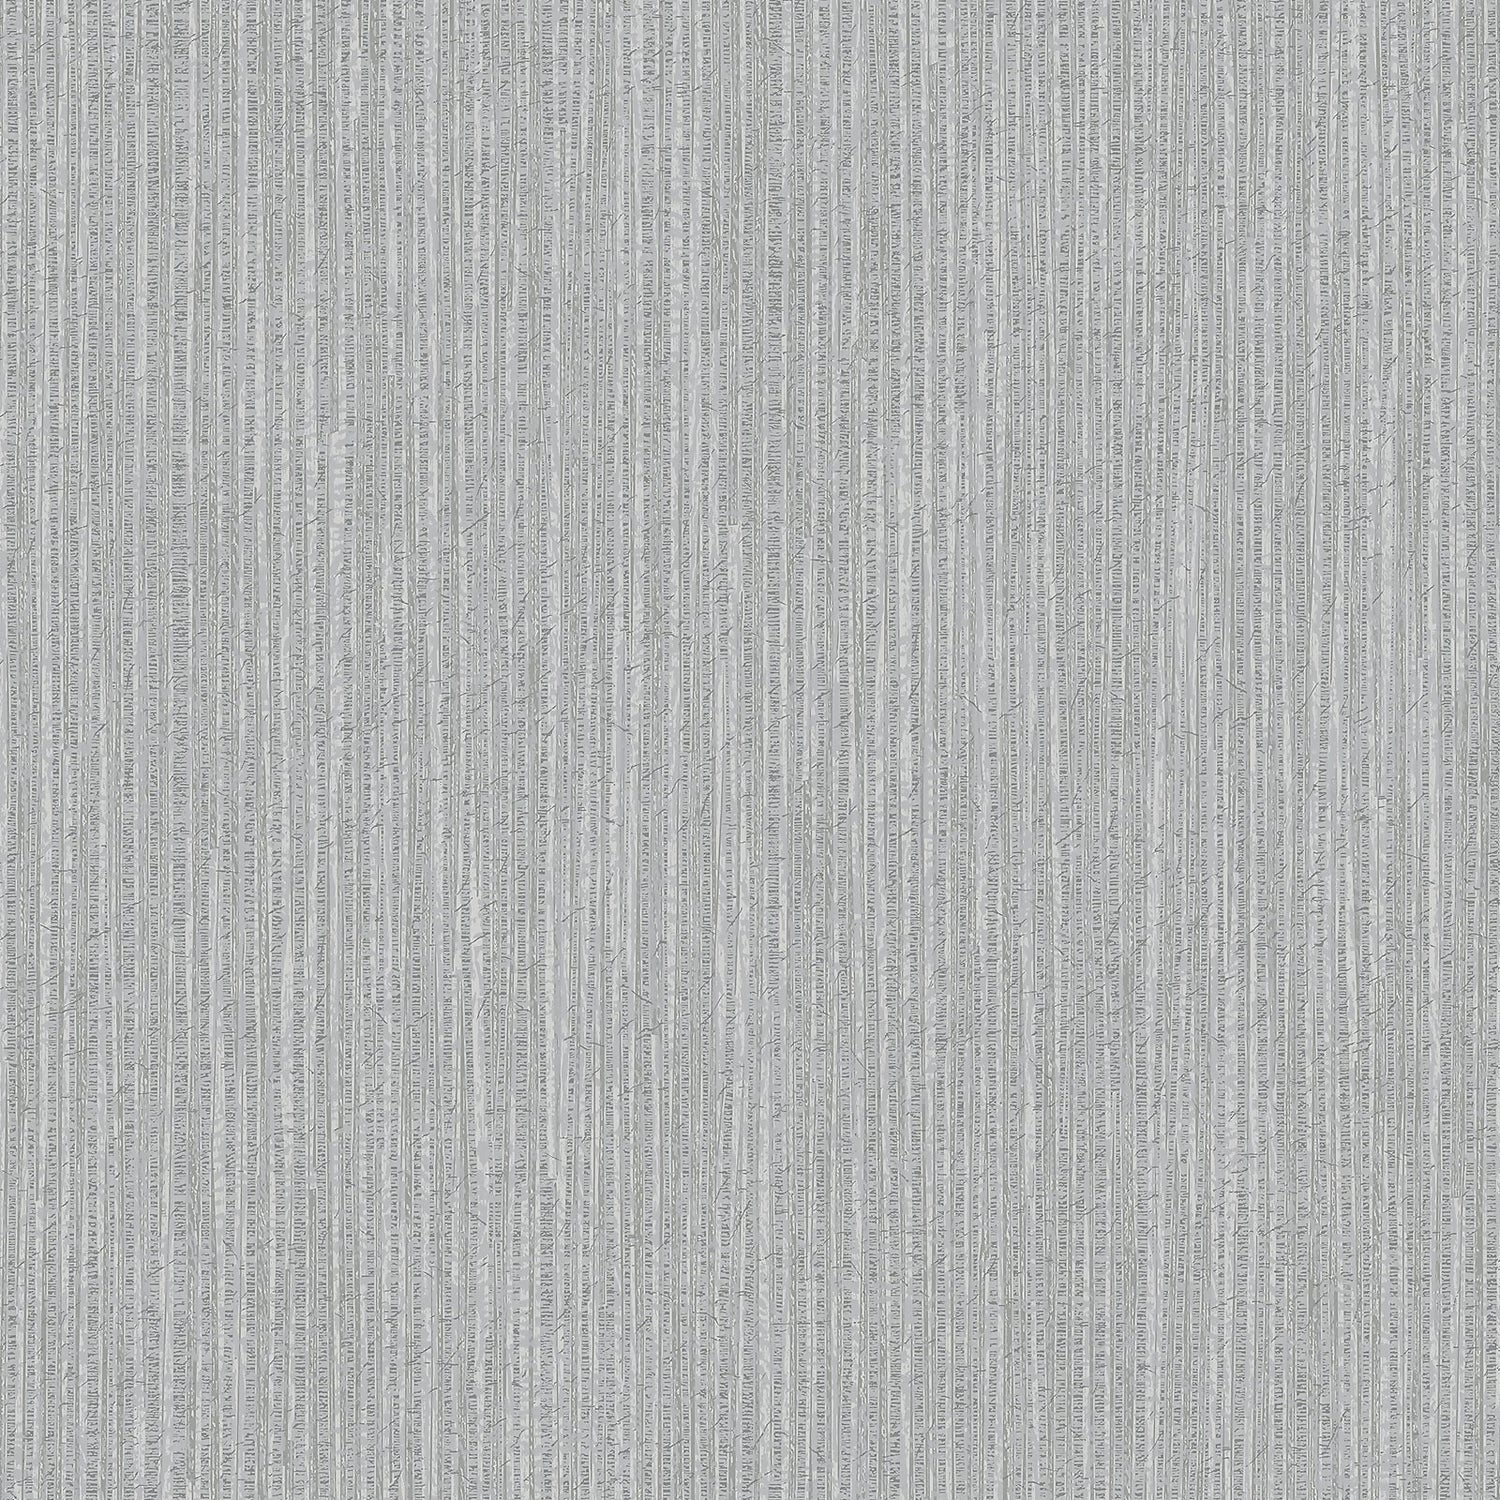 Grey Plain Wallpapers For Office Wall Size 21inch width